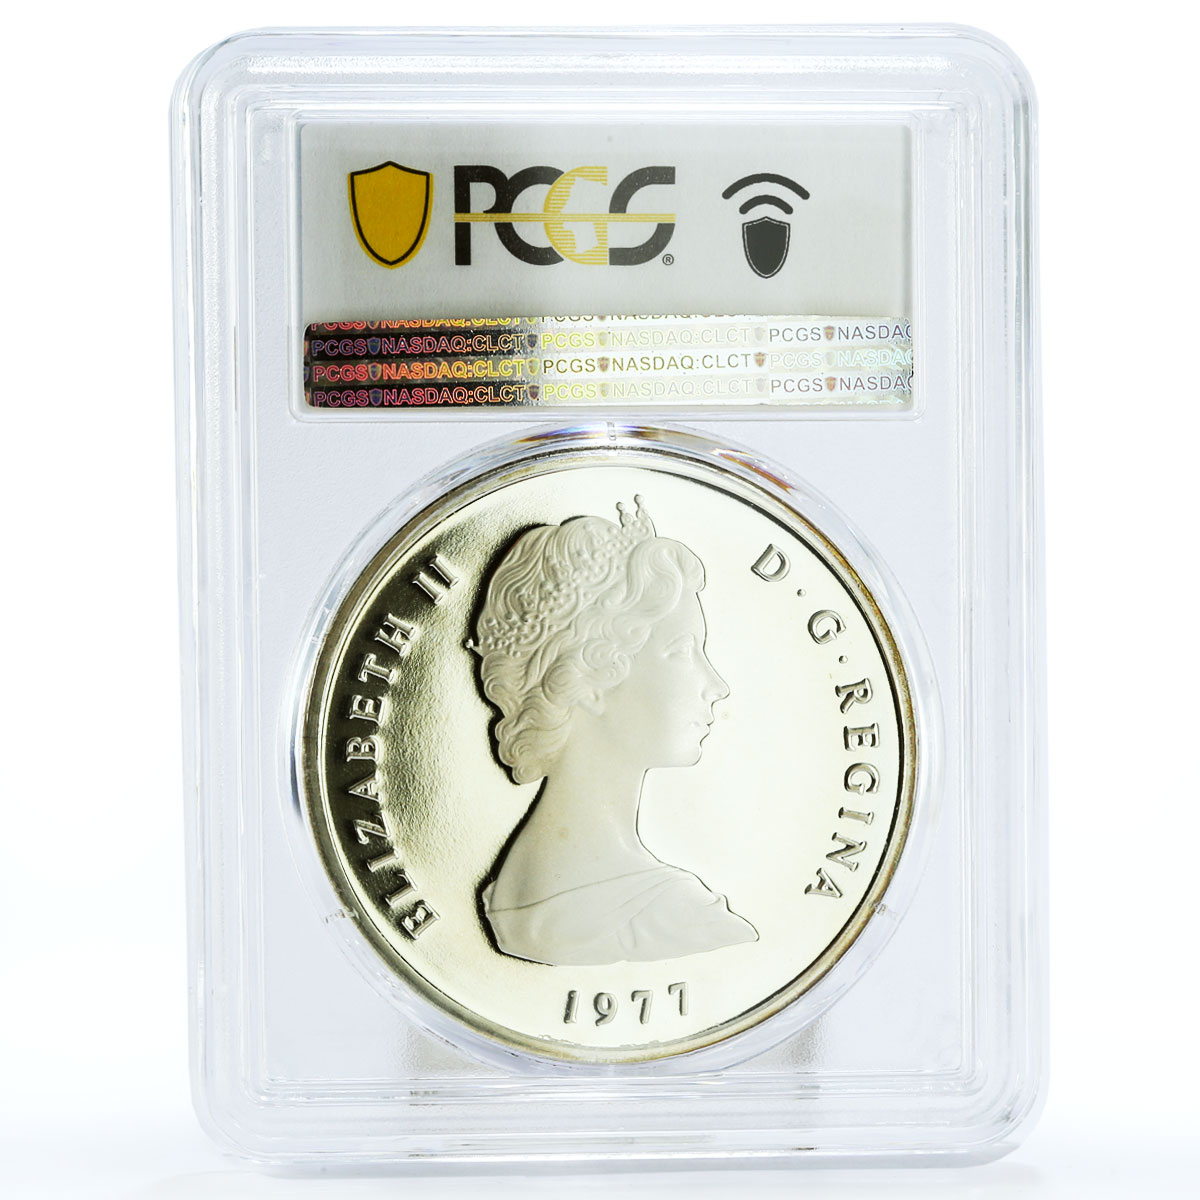 Turks and Caicos Islands 20 crowns George III PR69 PCGS silver coin 1977